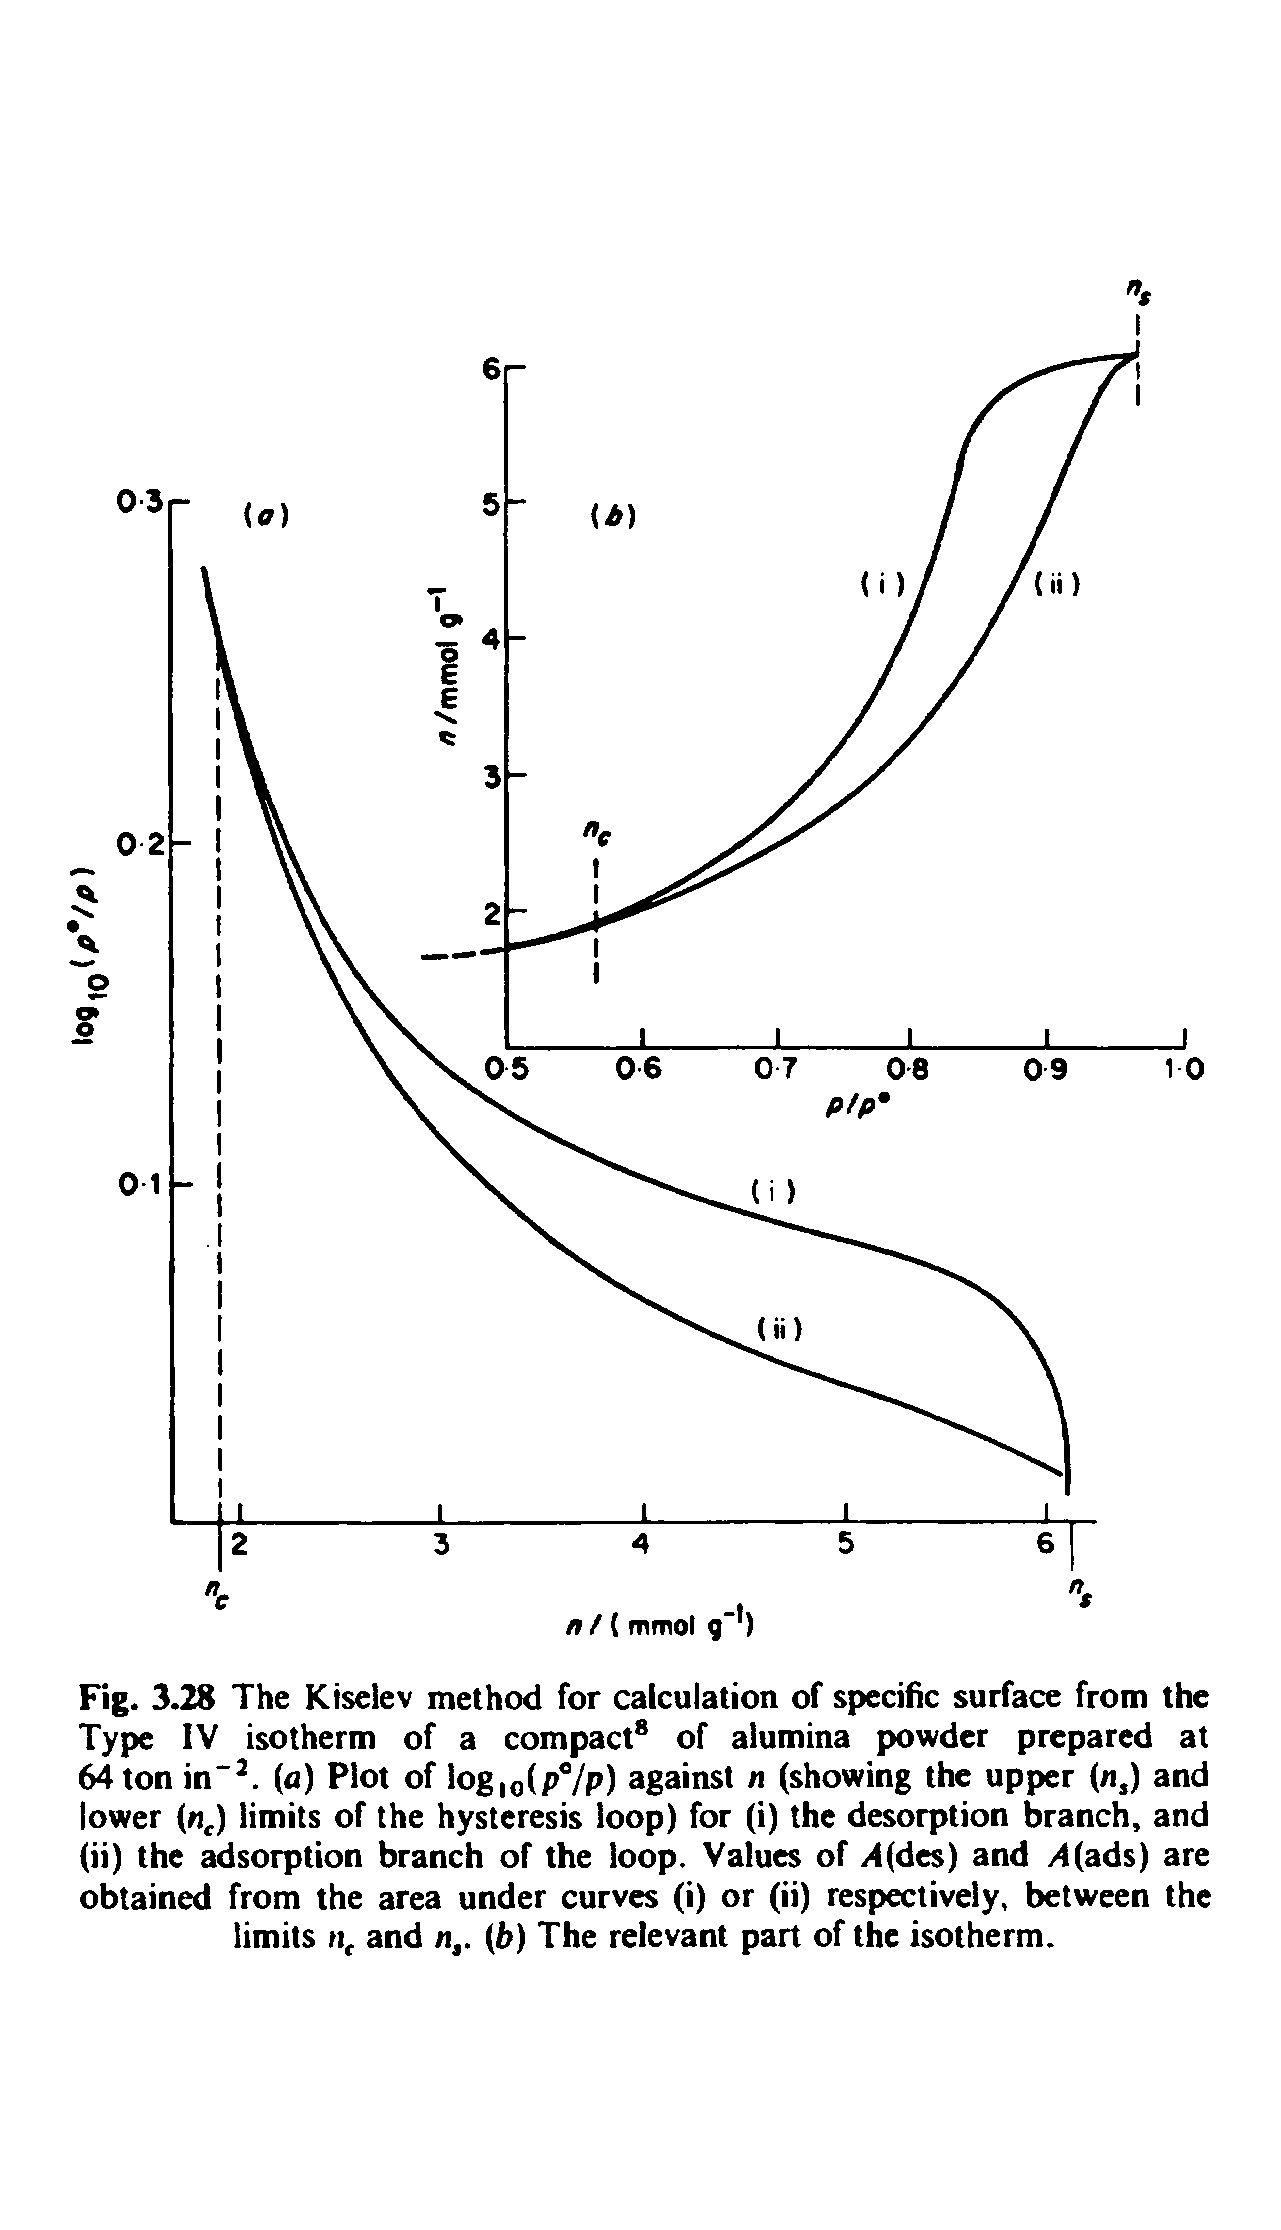 Fig. 3.28 The Kiselev method for calculation of specific surface from the Type IV isotherm of a compact of alumina powder prepared at 64 ton in". (a) Plot of log, (p7p) against n (showing the upper (n,) and lower (n,) limits of the hysteresis loop) for (i) the desorption branch, and (ii) the adsorption branch of the loop. Values of. 4(des) and /4(ads) are obtained from the area under curves (i) or (ii) respectively, between the limits II, and n,. (6) The relevant part of the isotherm.